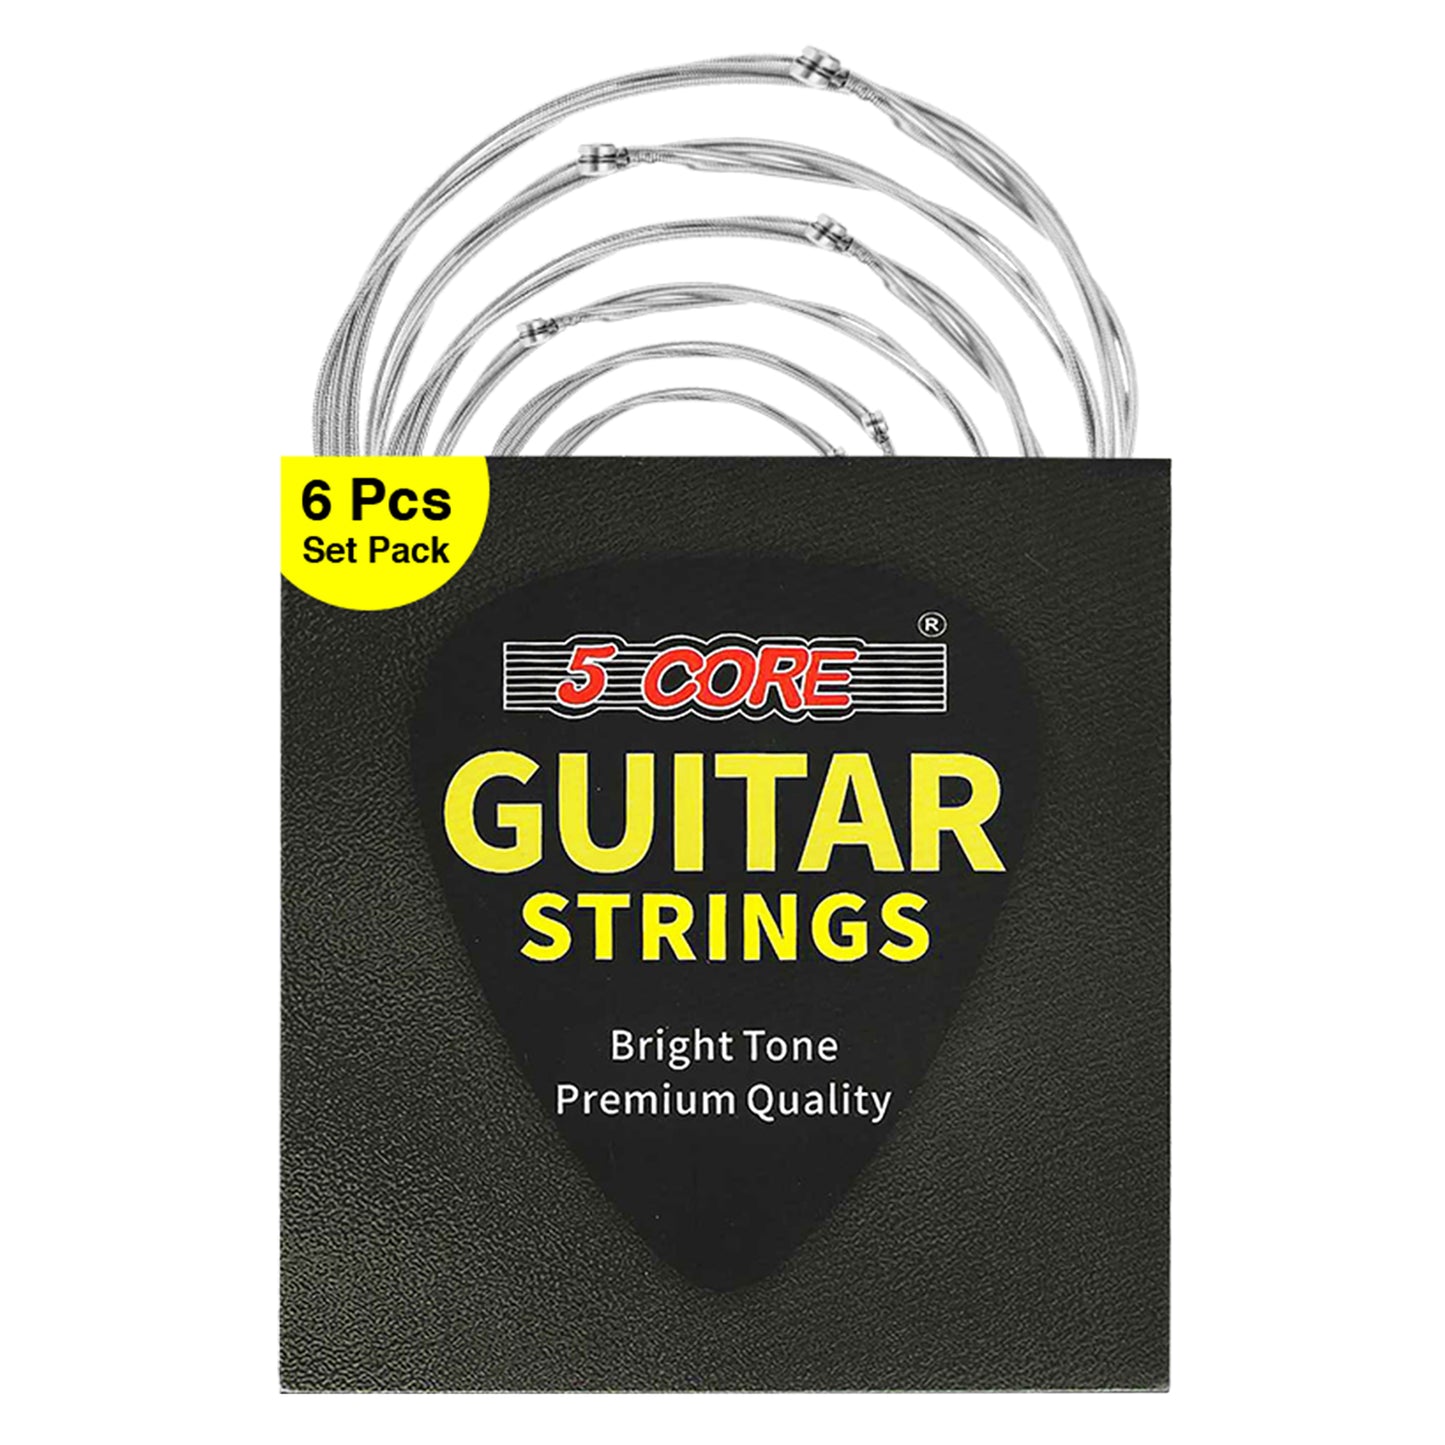 5 Core Guitar Strings 6 Pieces in 1 Set| Steel Core strings Light-Gauge 0.010-0.048 | Plain Steel Core, Steel Acoustic Guitar Strings for Clear, Focused, Brilliant Tone- GS AC